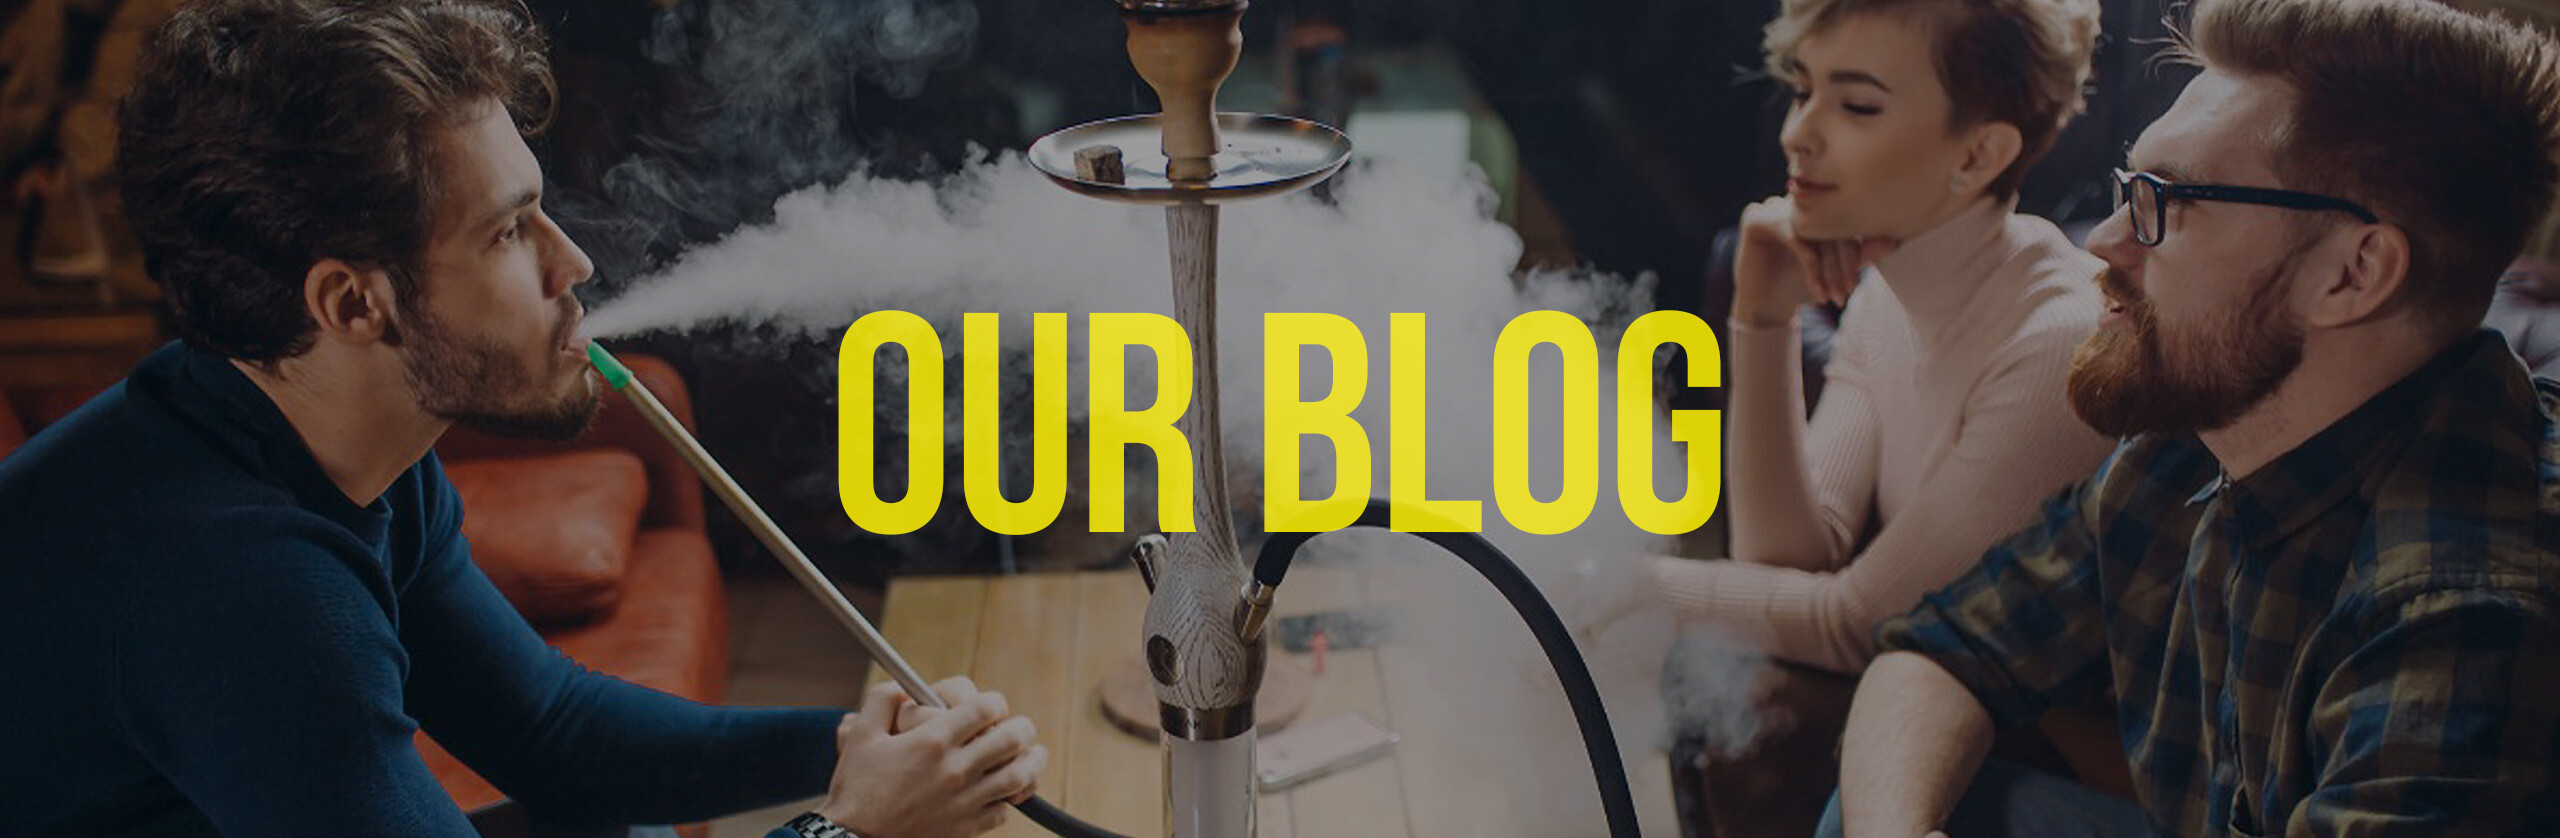 How To Choose The Best Hookah John Bowls | Tips And Reviews